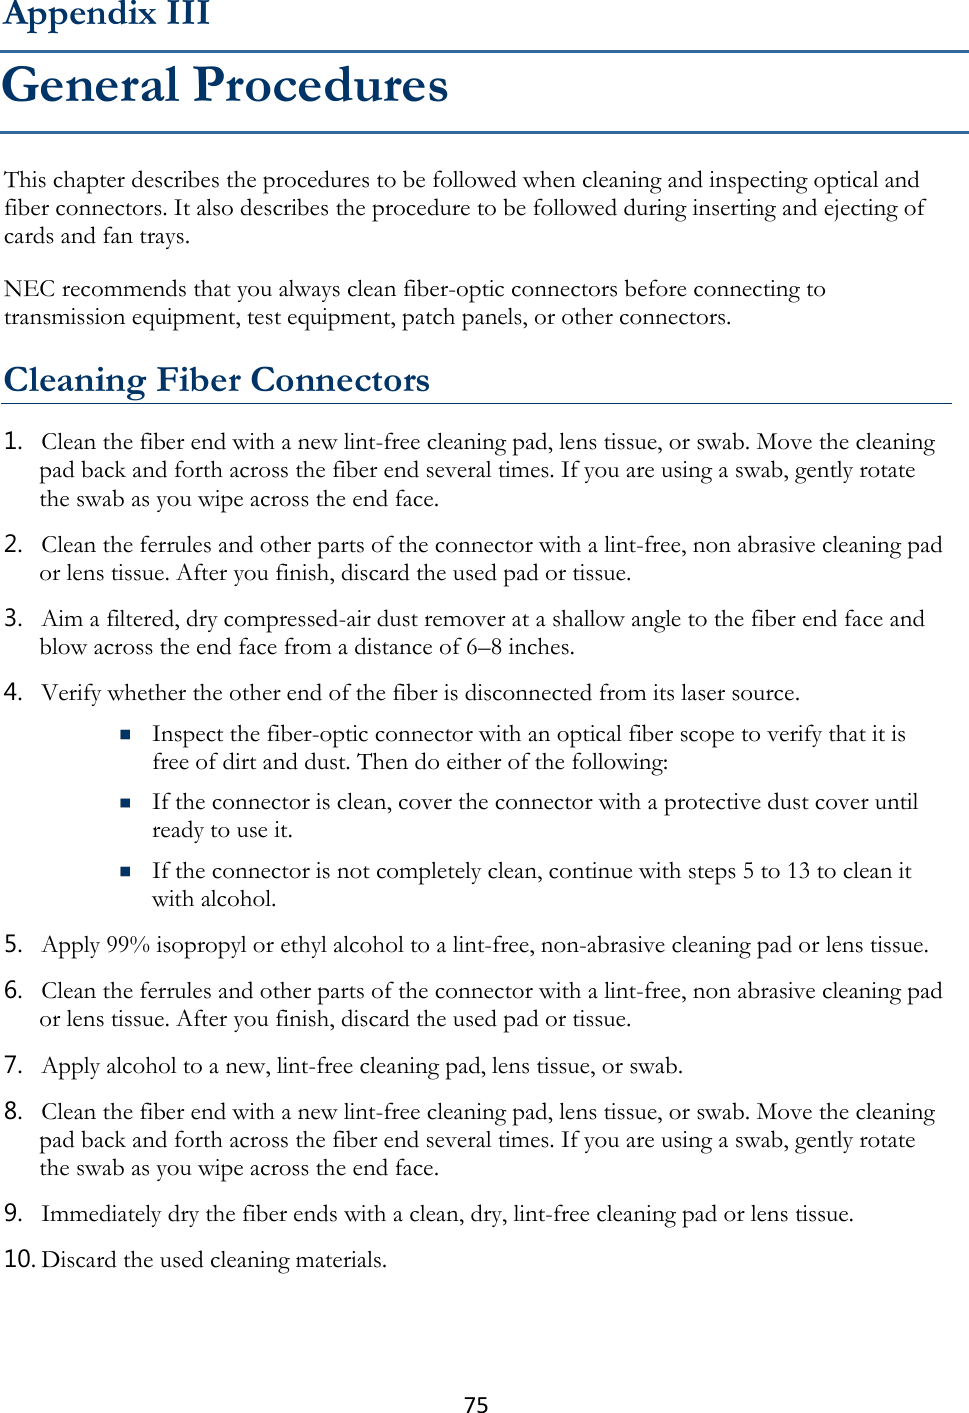 75  This chapter describes the procedures to be followed when cleaning and inspecting optical and fiber connectors. It also describes the procedure to be followed during inserting and ejecting of cards and fan trays. NEC recommends that you always clean fiber-optic connectors before connecting to transmission equipment, test equipment, patch panels, or other connectors.  Cleaning Fiber Connectors 1. Clean the fiber end with a new lint-free cleaning pad, lens tissue, or swab. Move the cleaning pad back and forth across the fiber end several times. If you are using a swab, gently rotate the swab as you wipe across the end face. 2. Clean the ferrules and other parts of the connector with a lint-free, non abrasive cleaning pad or lens tissue. After you finish, discard the used pad or tissue. 3. Aim a filtered, dry compressed-air dust remover at a shallow angle to the fiber end face and blow across the end face from a distance of 6–8 inches. 4. Verify whether the other end of the fiber is disconnected from its laser source.  Inspect the fiber-optic connector with an optical fiber scope to verify that it is free of dirt and dust. Then do either of the following:  If the connector is clean, cover the connector with a protective dust cover until ready to use it.  If the connector is not completely clean, continue with steps 5 to 13 to clean it with alcohol. 5. Apply 99% isopropyl or ethyl alcohol to a lint-free, non-abrasive cleaning pad or lens tissue. 6. Clean the ferrules and other parts of the connector with a lint-free, non abrasive cleaning pad or lens tissue. After you finish, discard the used pad or tissue. 7. Apply alcohol to a new, lint-free cleaning pad, lens tissue, or swab. 8. Clean the fiber end with a new lint-free cleaning pad, lens tissue, or swab. Move the cleaning pad back and forth across the fiber end several times. If you are using a swab, gently rotate the swab as you wipe across the end face. 9. Immediately dry the fiber ends with a clean, dry, lint-free cleaning pad or lens tissue. 10. Discard the used cleaning materials. Appendix III General Procedures 